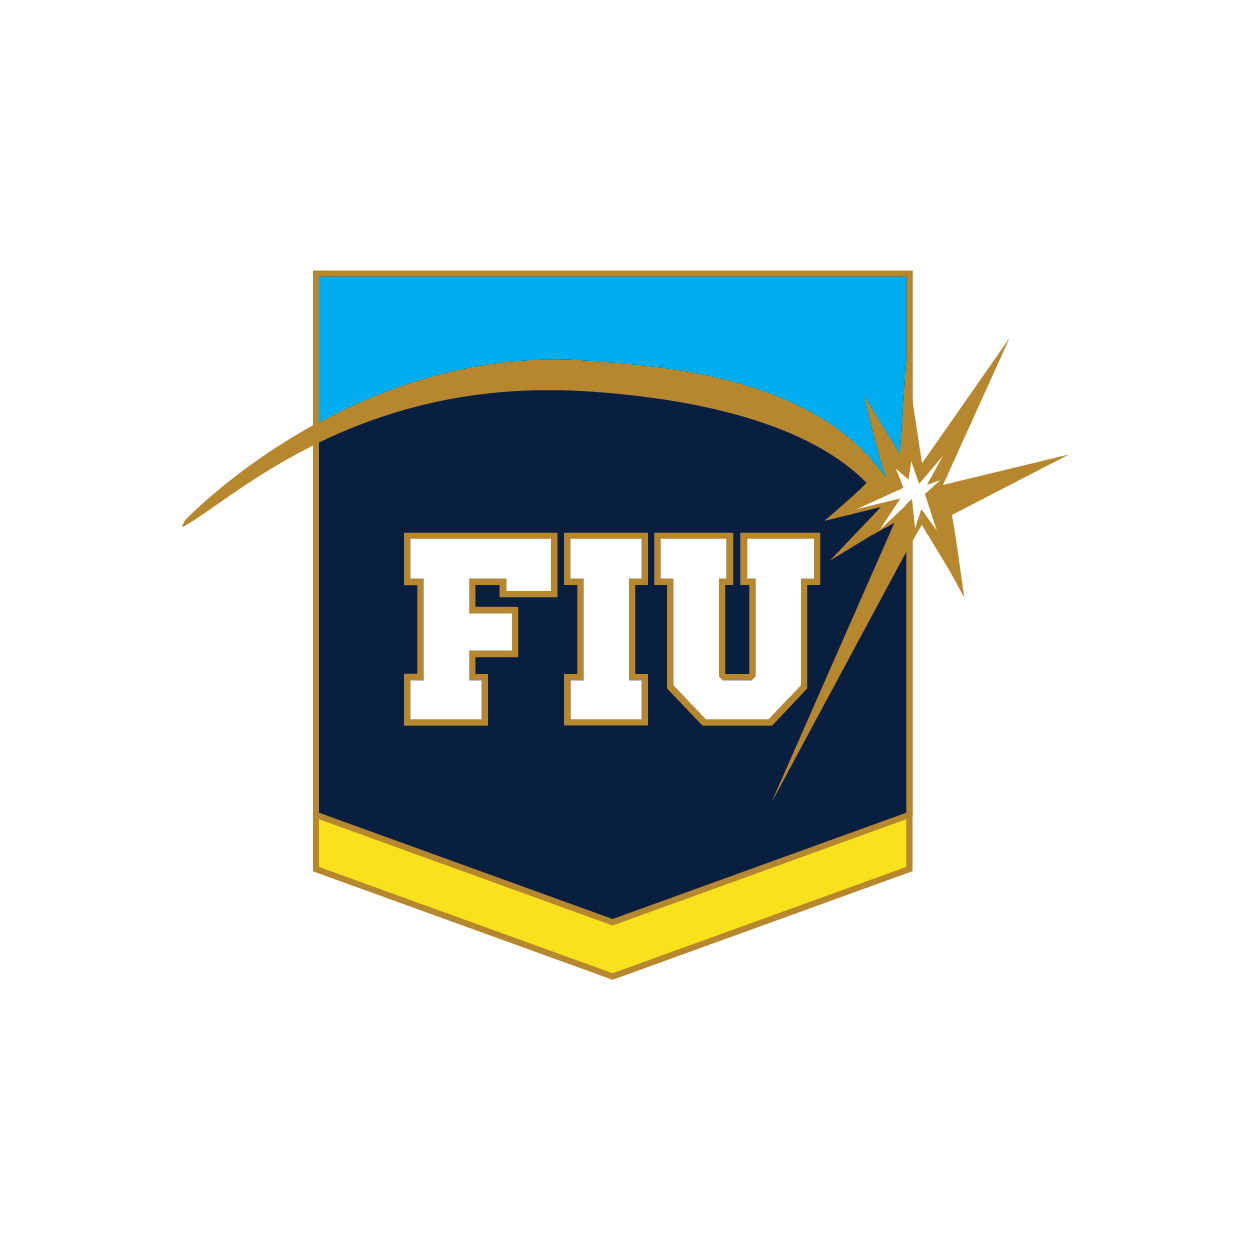 The 2020 pin is a shield shape in navy blue with FIU in the center in white and with a gold spark over it, at the top of the pin part of the shield shape is in sky blue and at the bottom of the shield it is in bright sun yellow